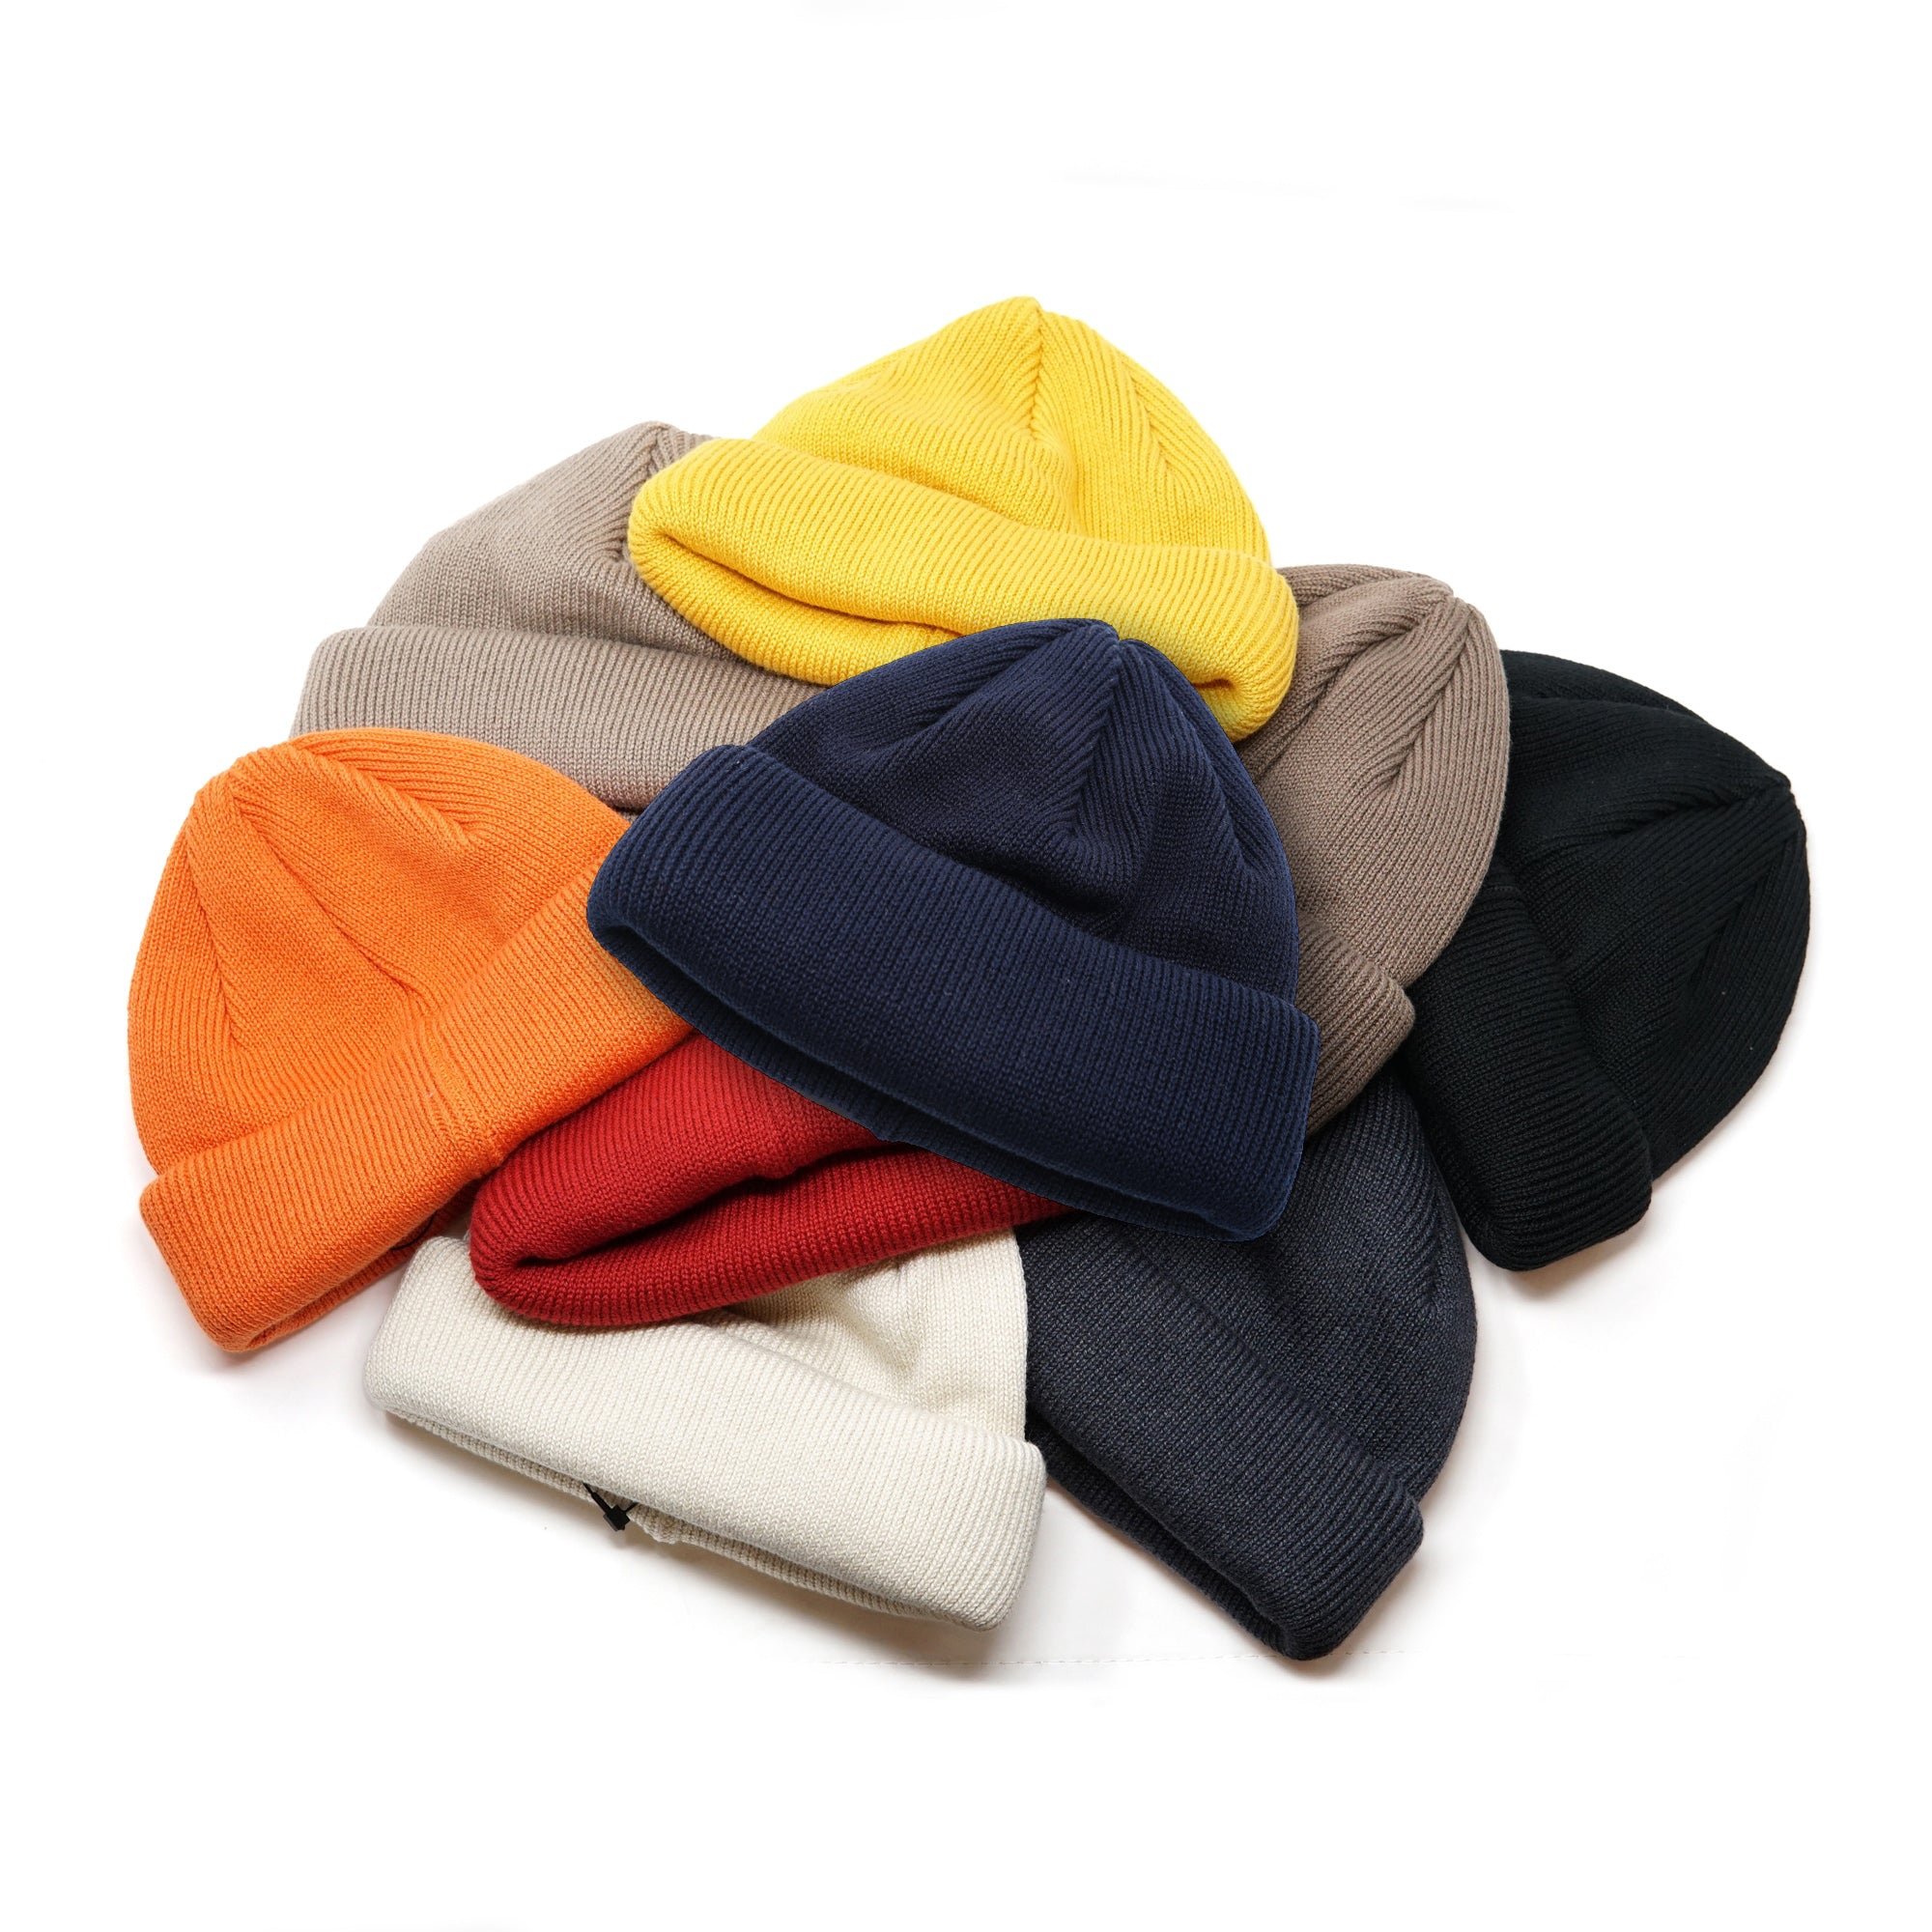 No:RL-18-935 | Name:Roll Knit Cap | Color:Green/Beige/Brown/Ivory/Red/Charcoal/Mustard/Orange/Black【RACAL_ラカル】【ネコポス選択可能】